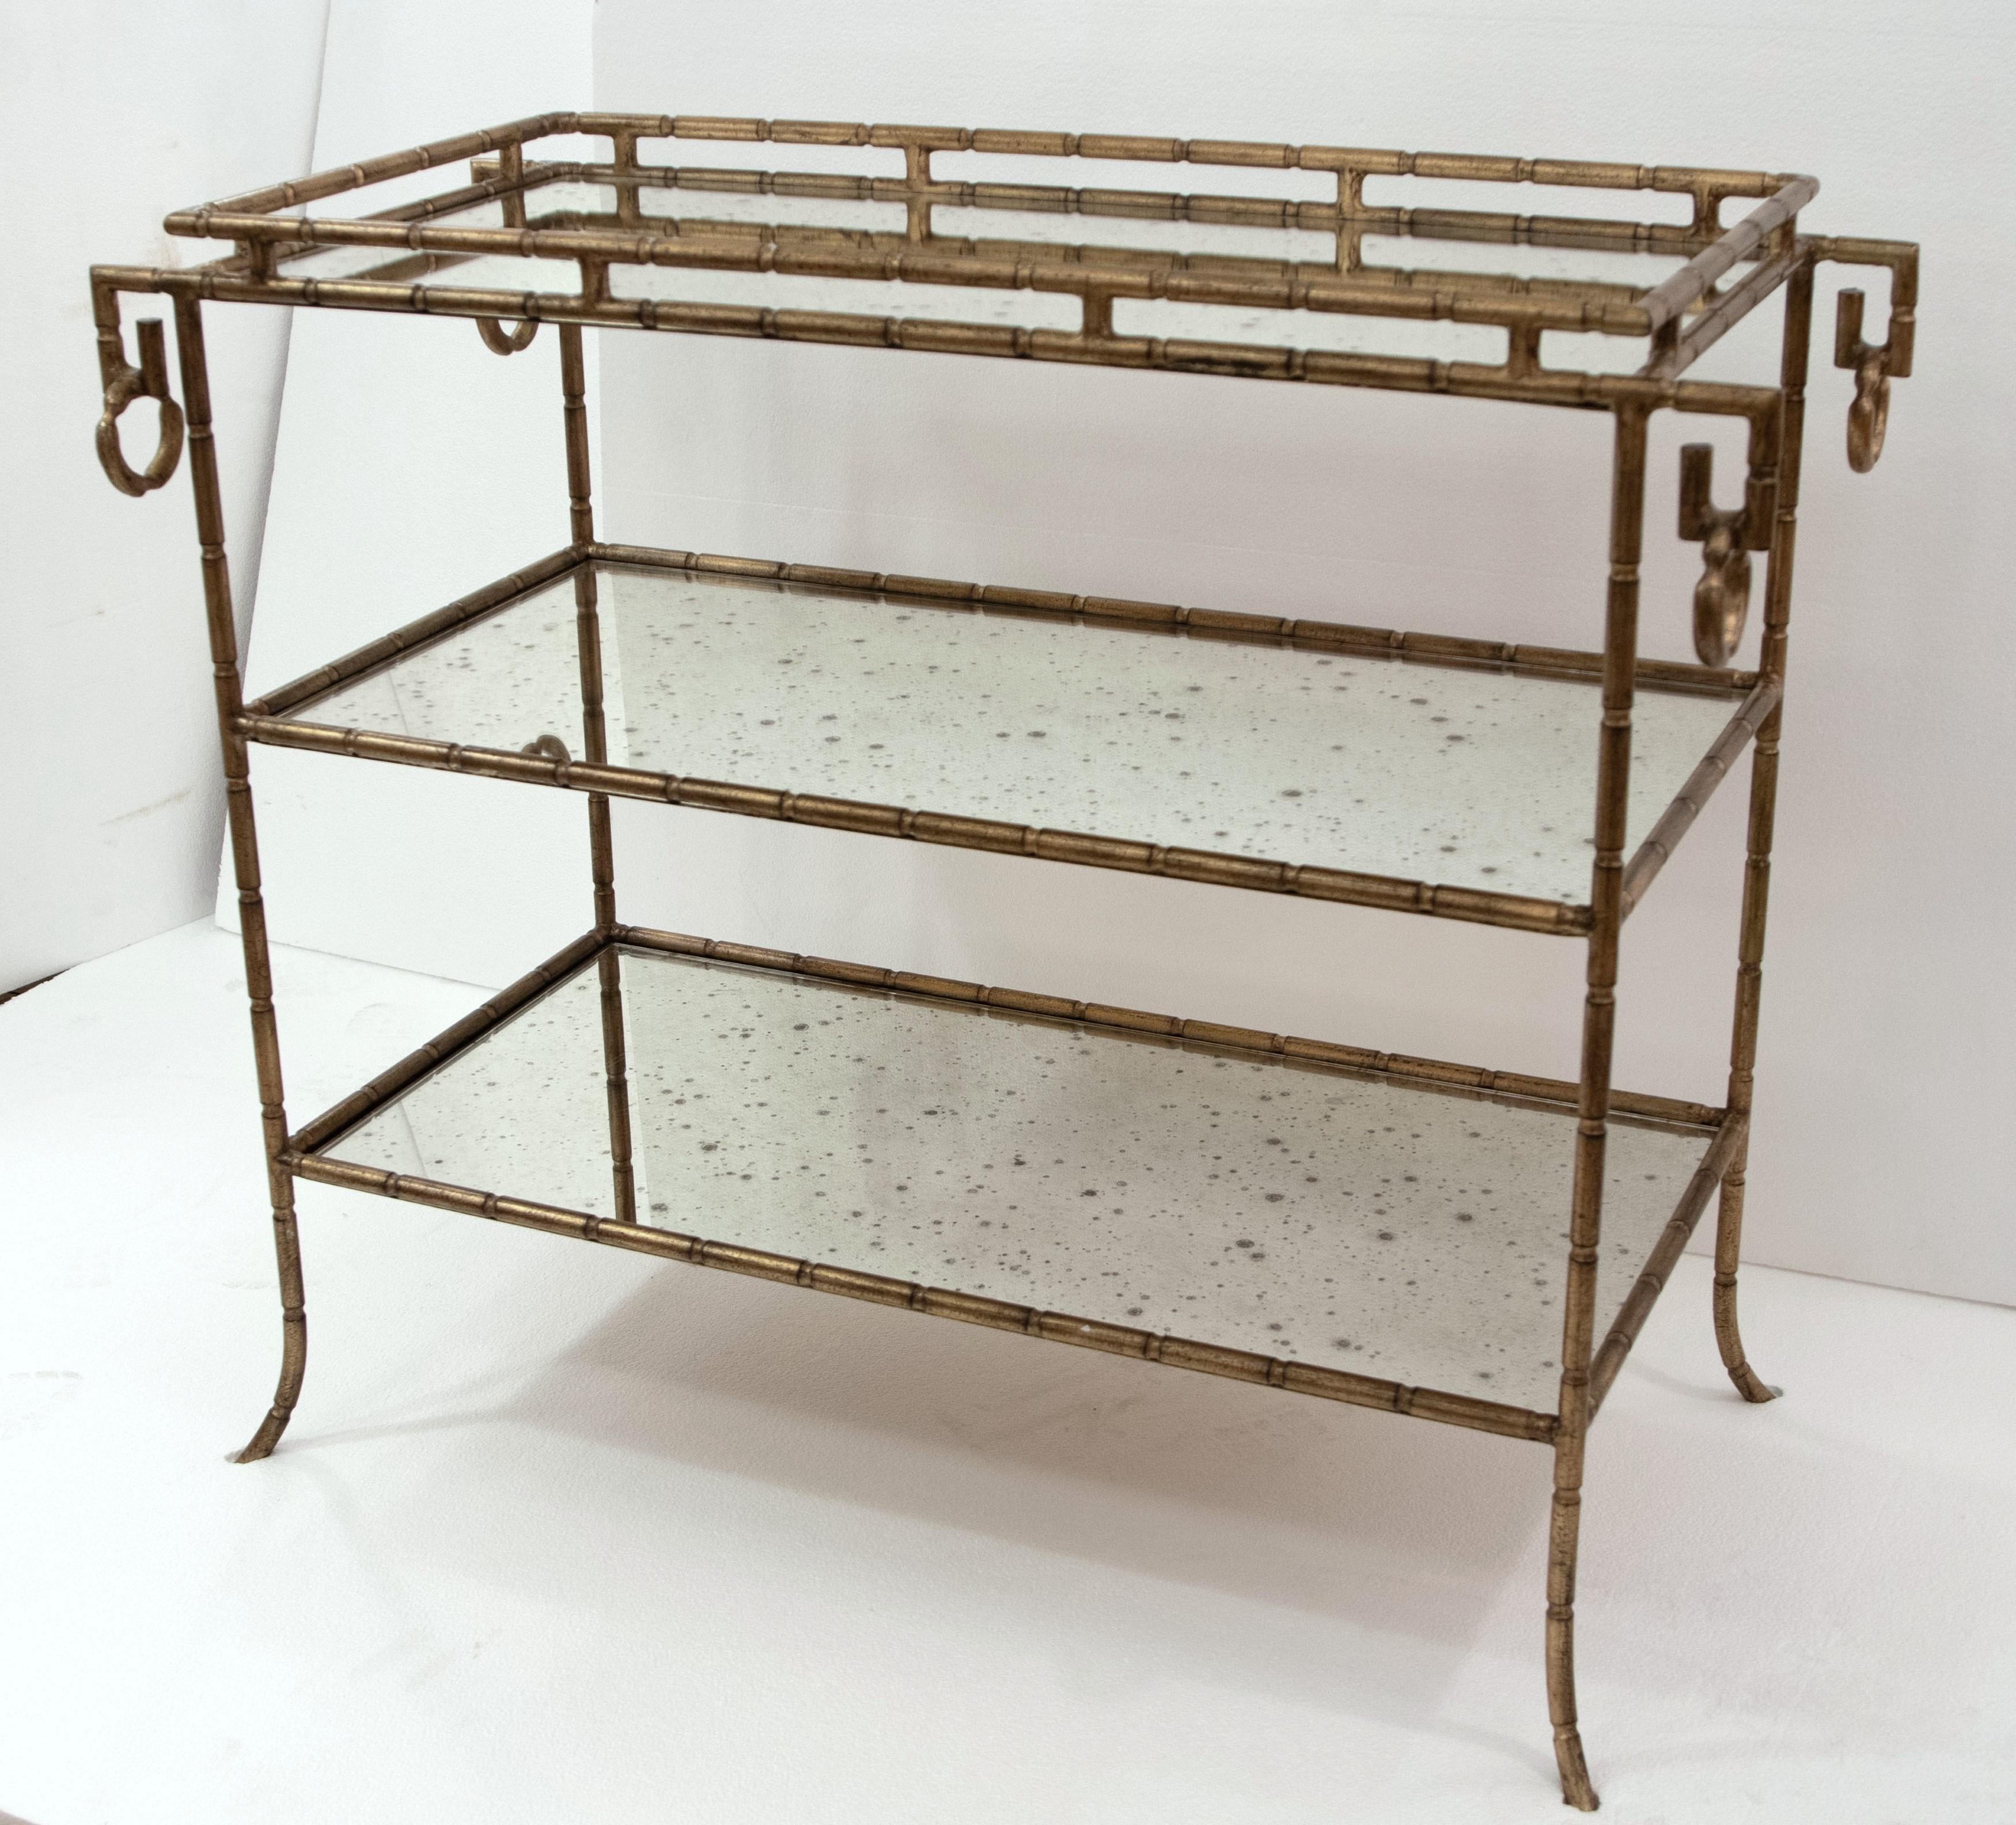 Hollywood Regency bar table with two glass shelves in a gilt iron construction. Good condition with appropriate wear from age. One available. Please note, this item is located in one of our NYC locations.